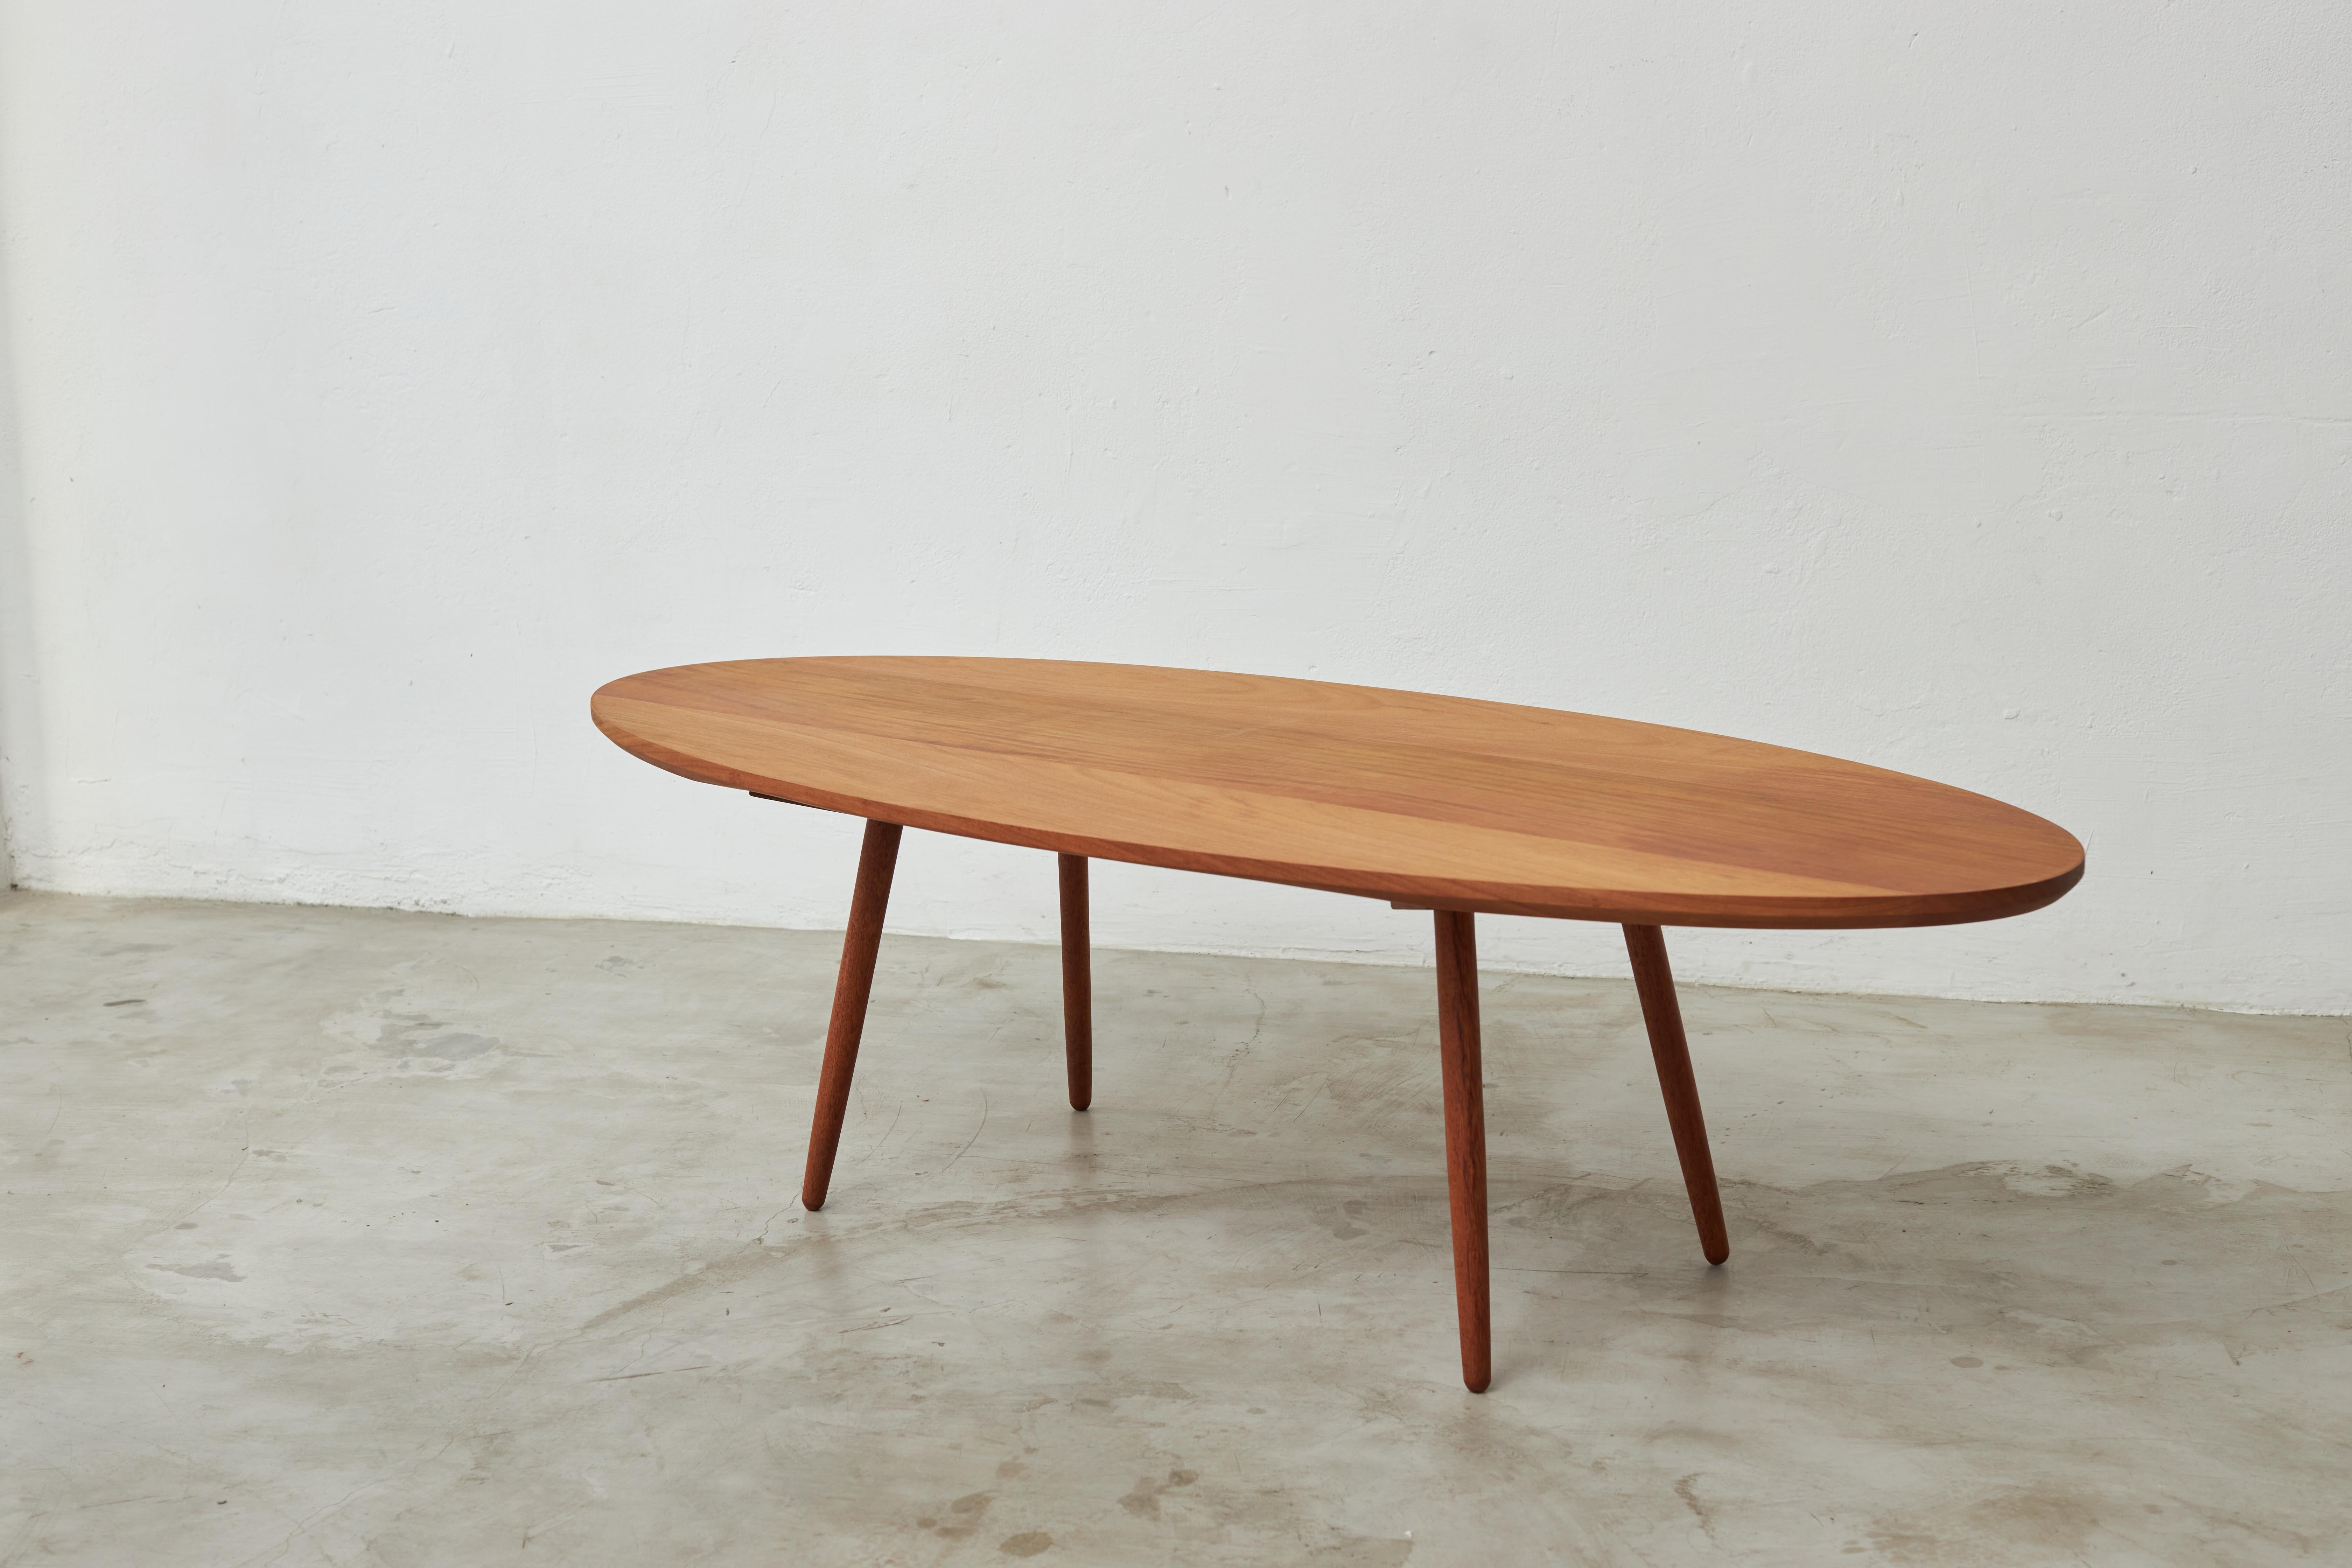 'Banquisa' Cofee Table - Brazilian design by André Bianco